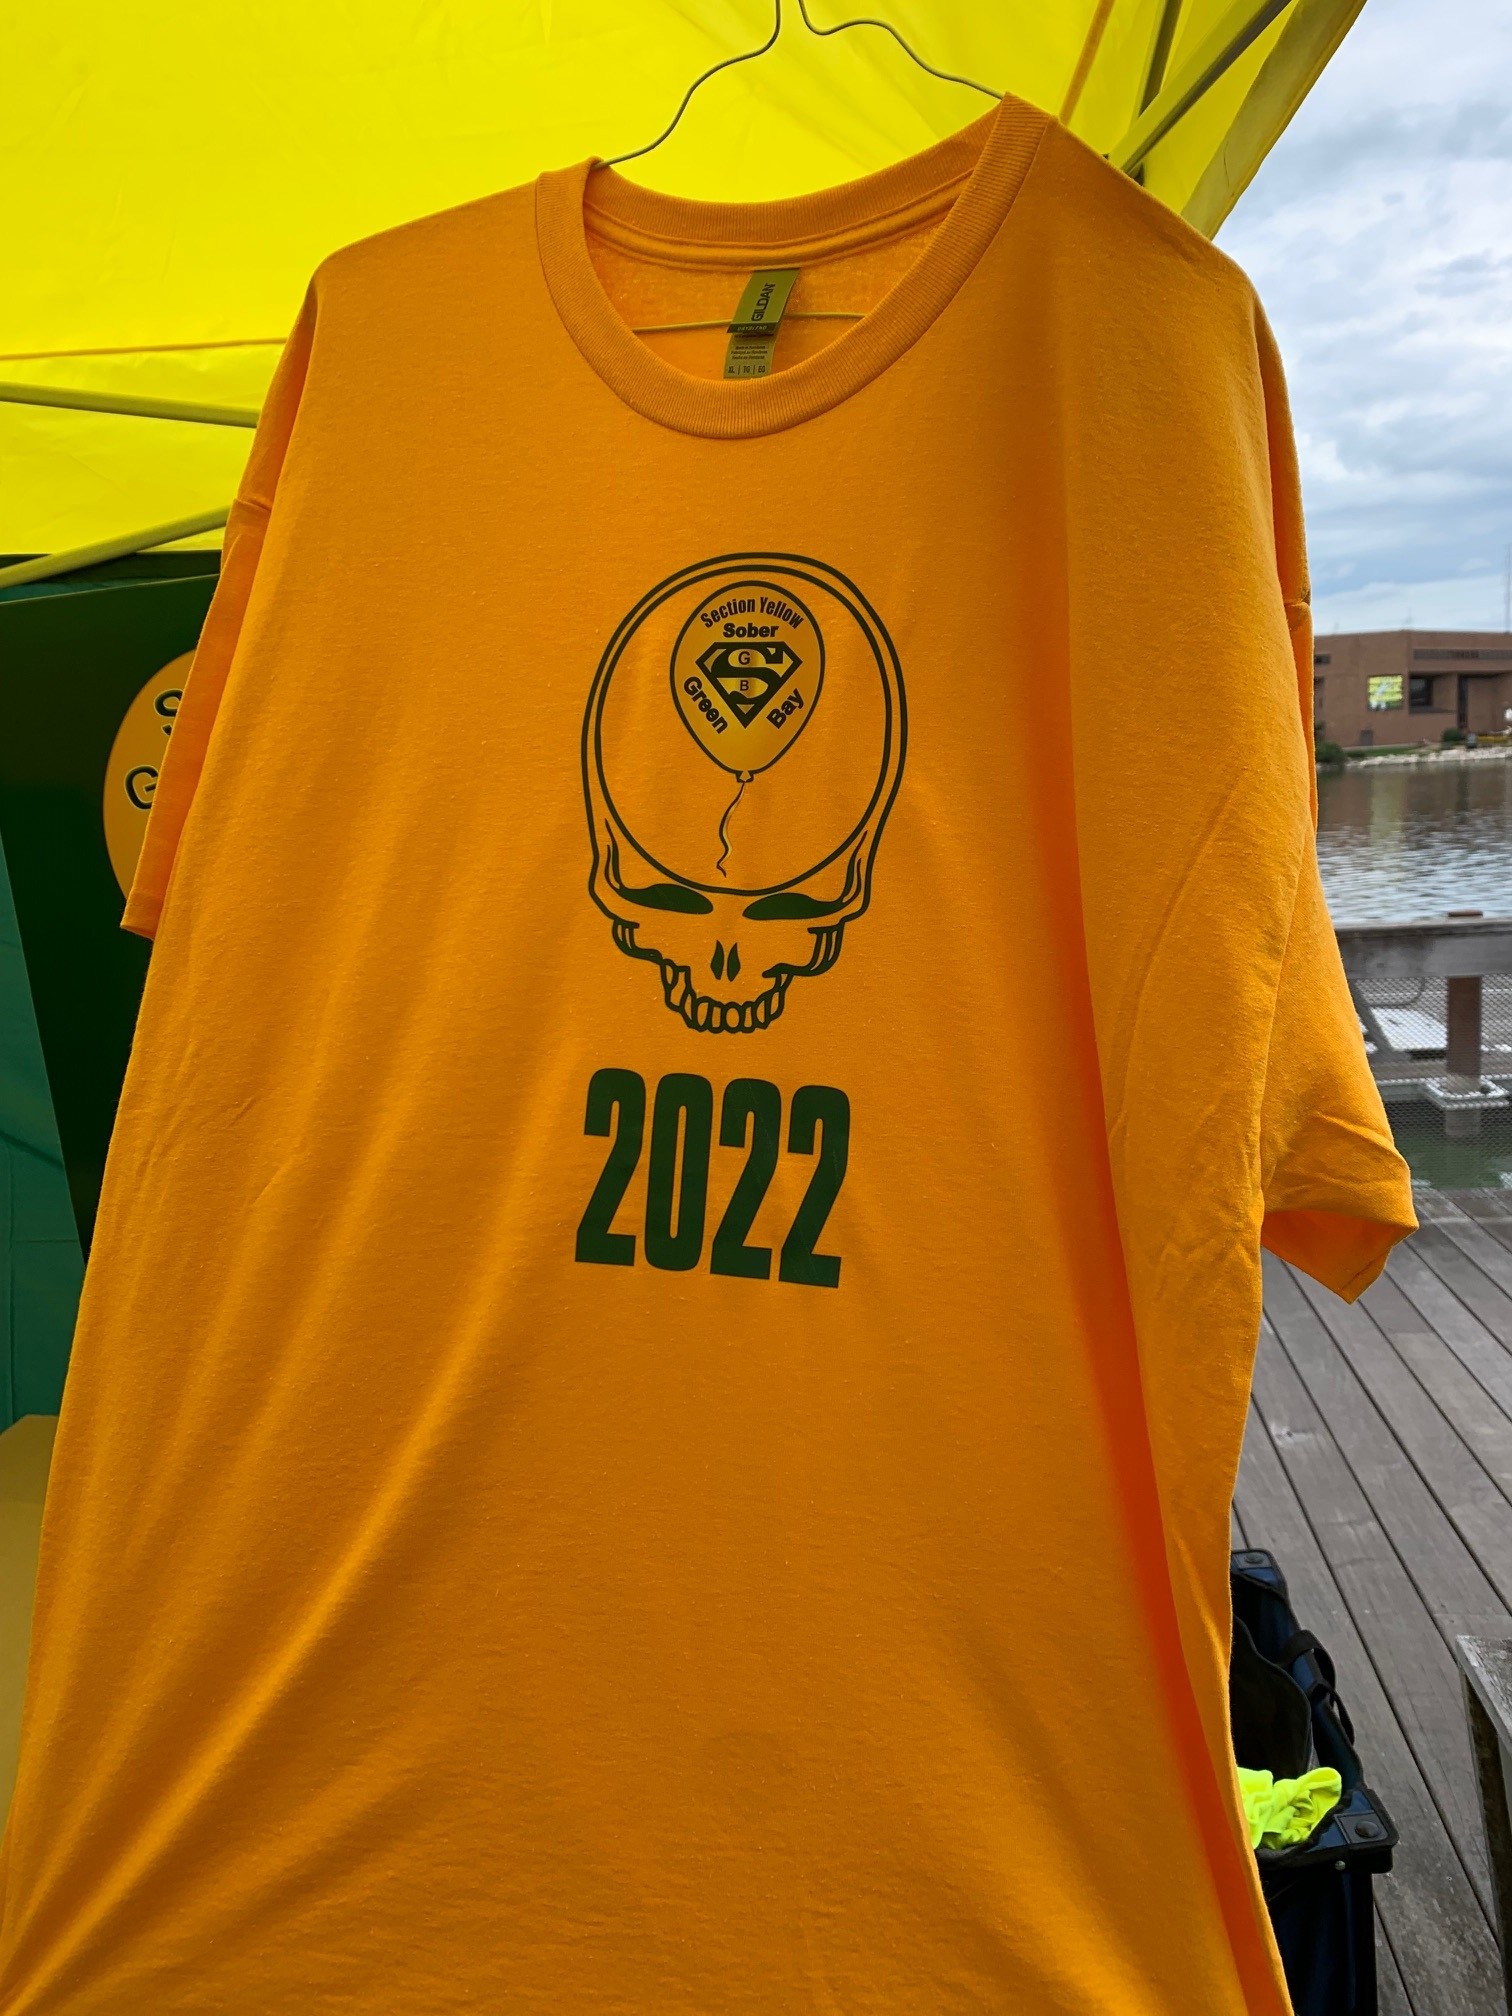 A Yellow T-shirt with the skull design of the Grateful Dead